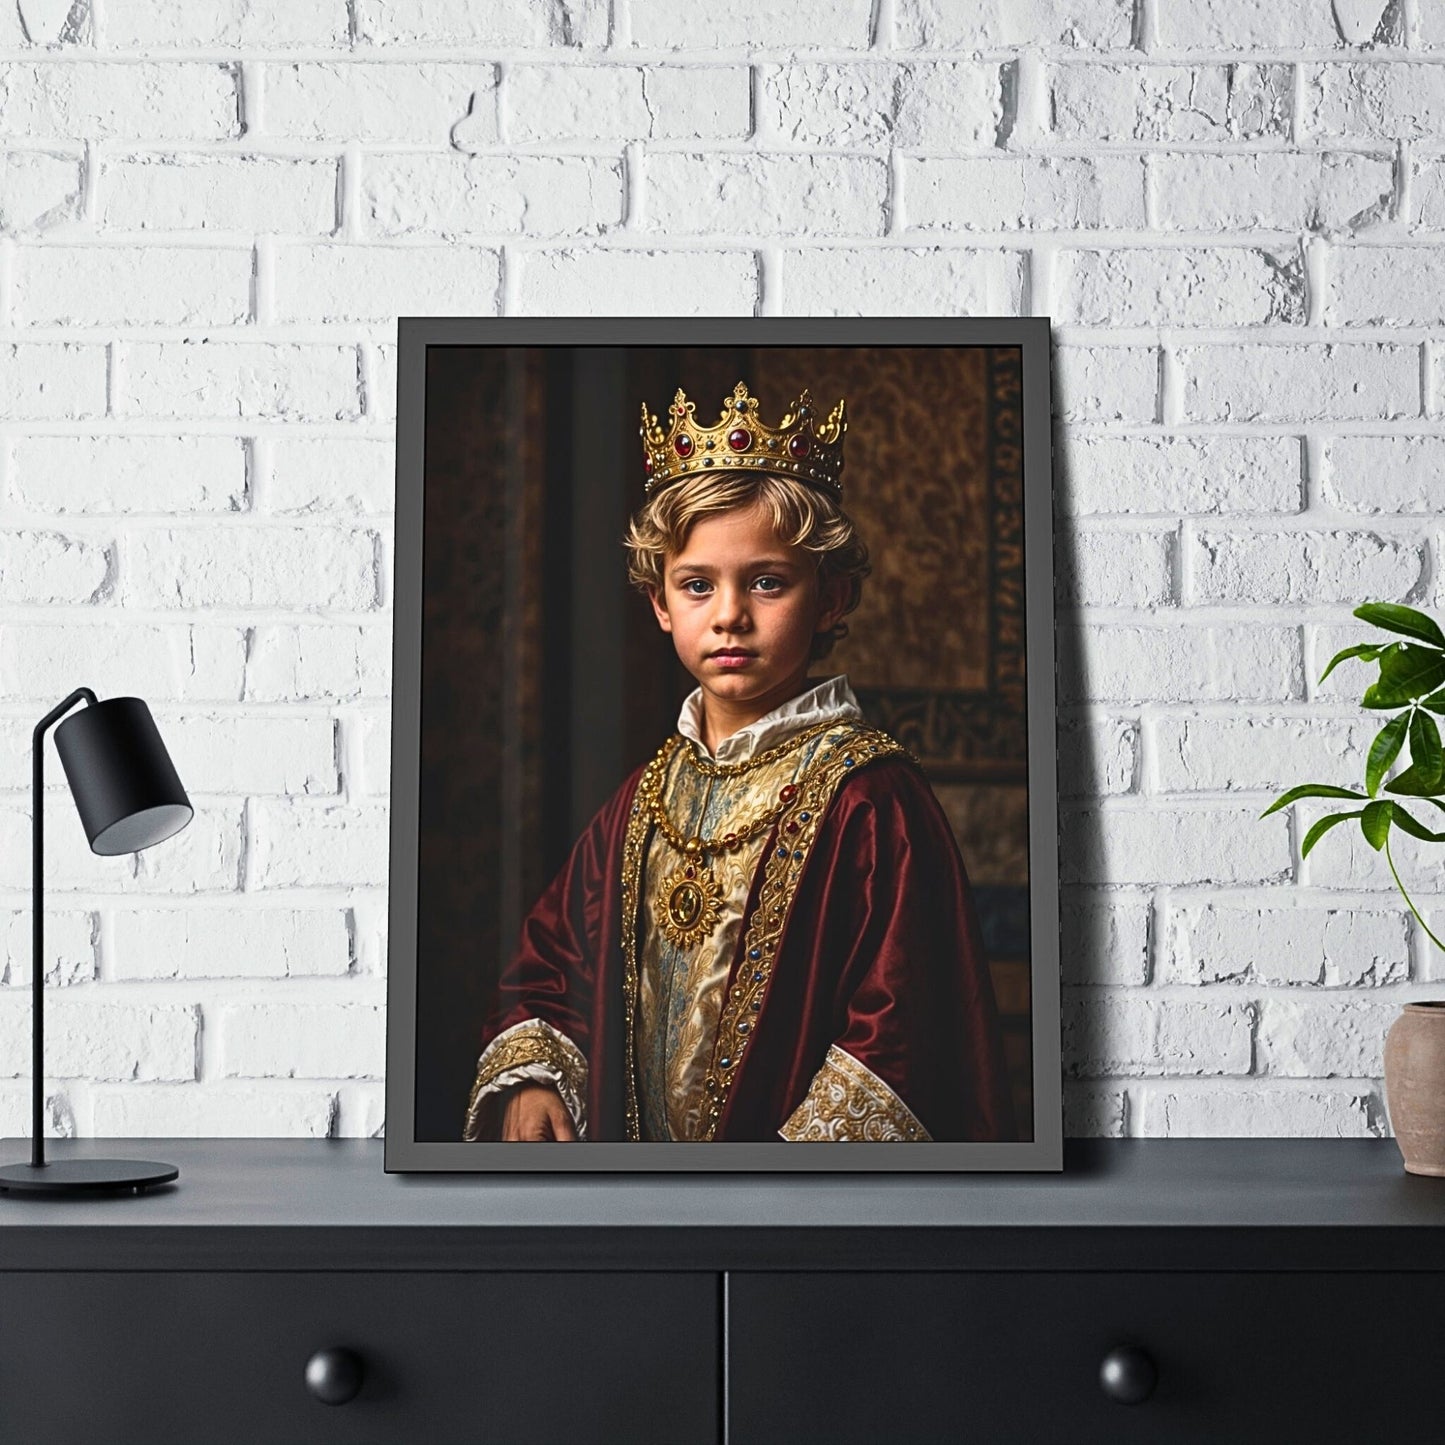 Transform your child's photo into a stunning royal portrait. Our custom portraits are perfect for birthdays, holidays, and special milestones. Celebrate your little Prince or Princess with personalized, Renaissance-inspired artwork that adds a touch of royalty to any room decor.